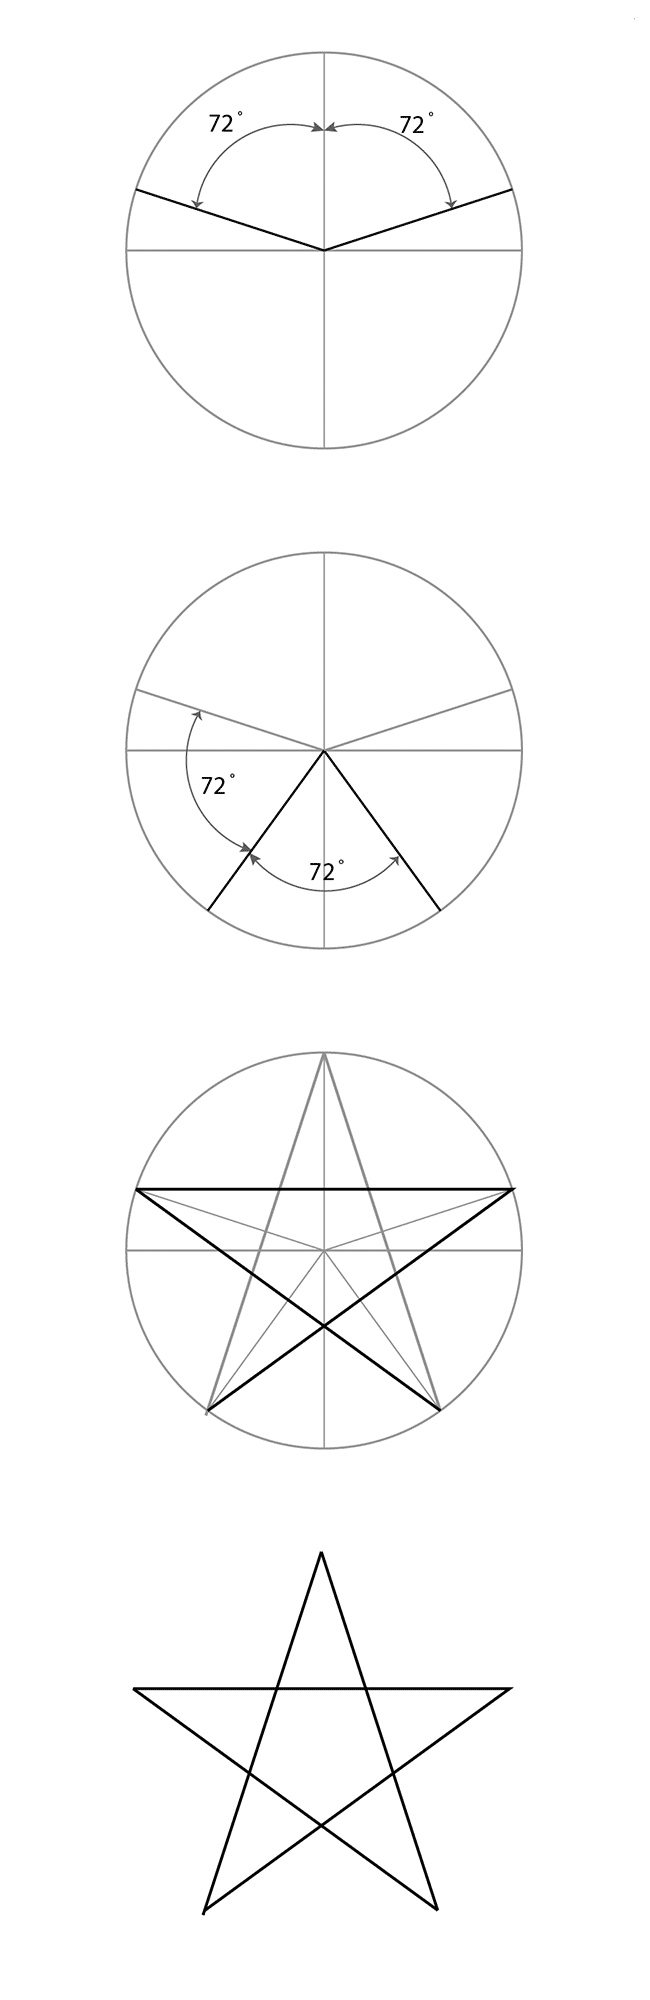 How to draw a star?